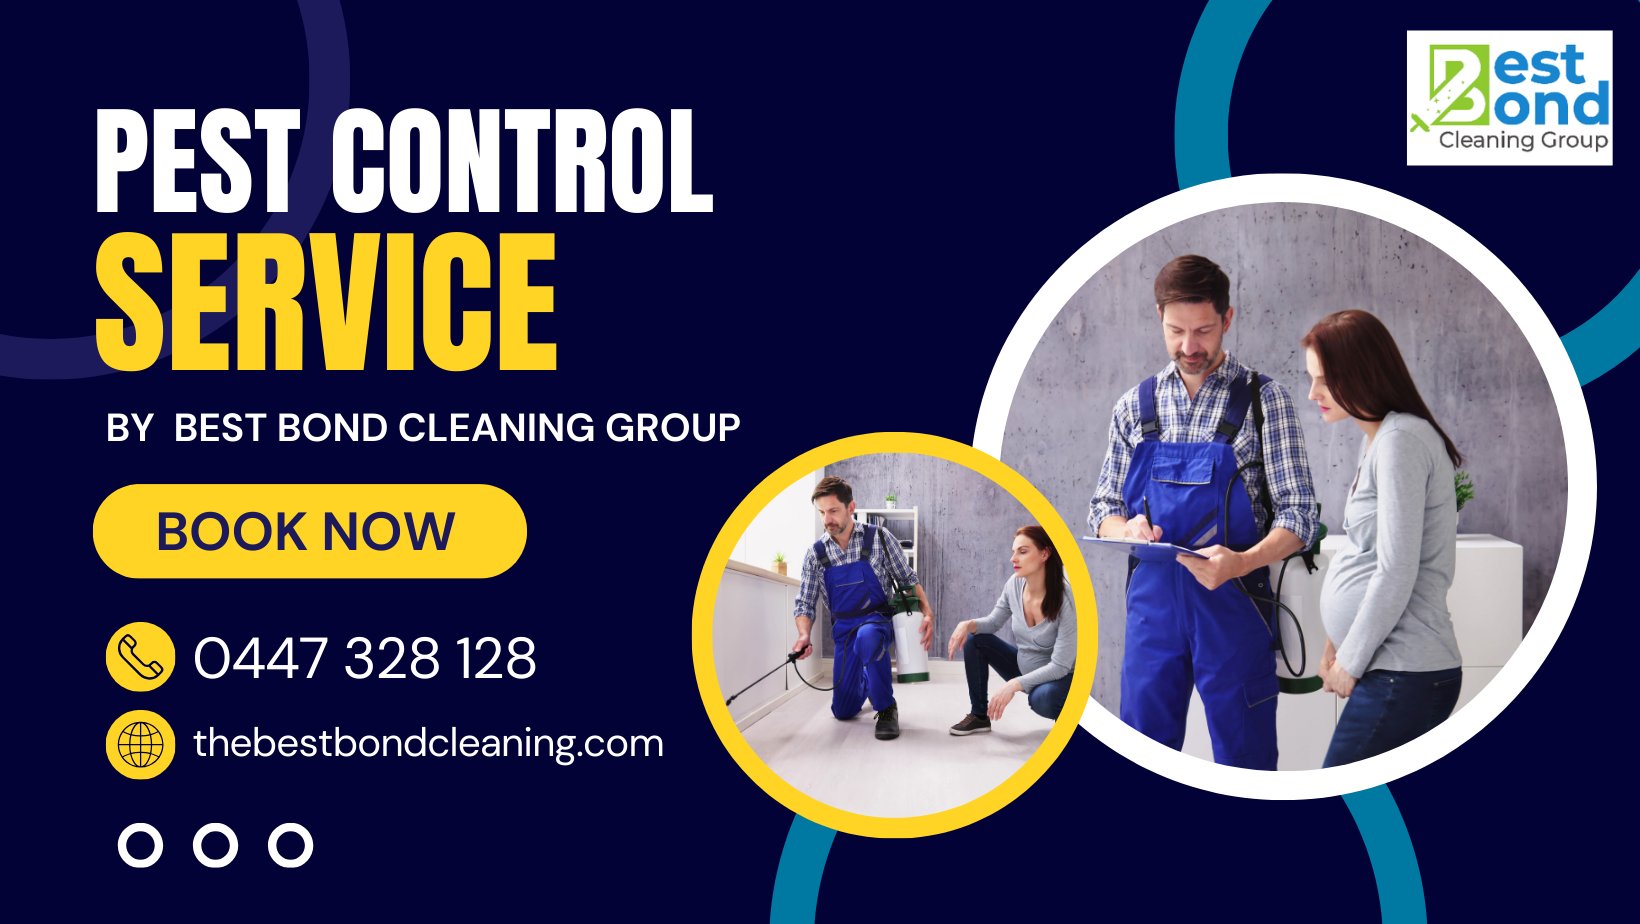 Pest Control Services Brisbane and Carpet Cleaning Service by Best Bond Cleaning Group